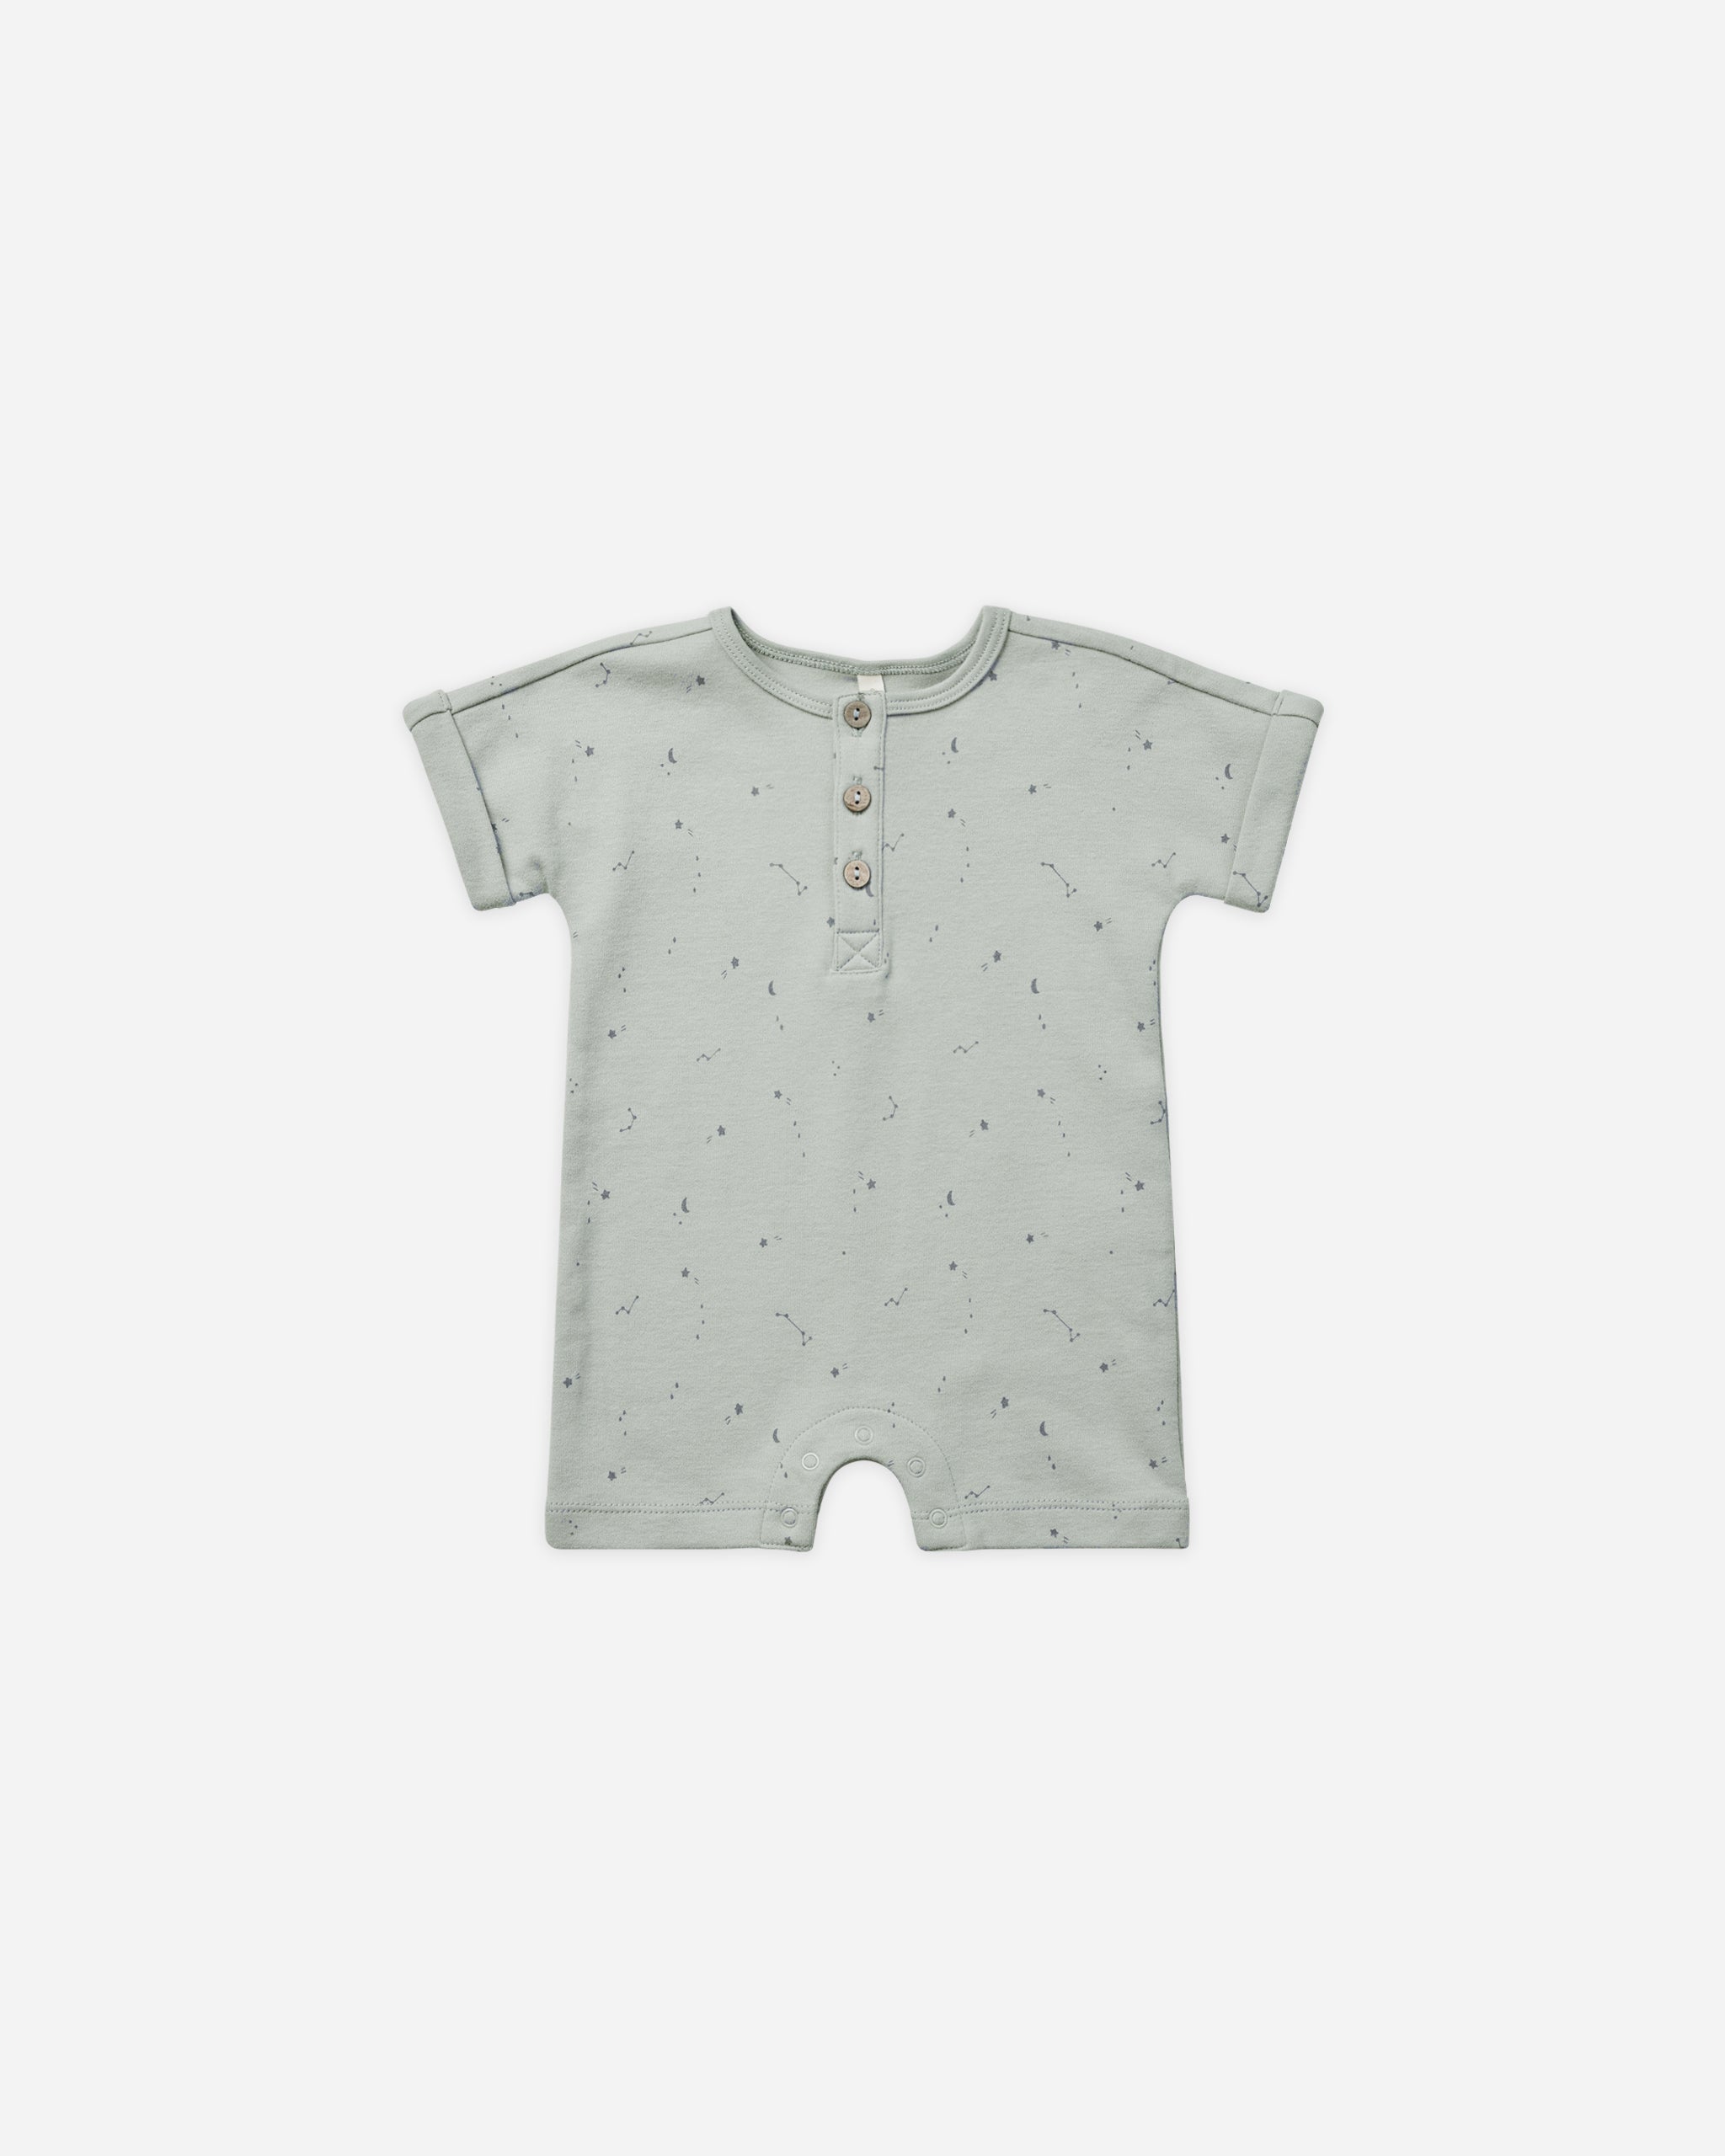 Short Sleeve One-Piece || Constellations - Rylee + Cru | Kids Clothes | Trendy Baby Clothes | Modern Infant Outfits |